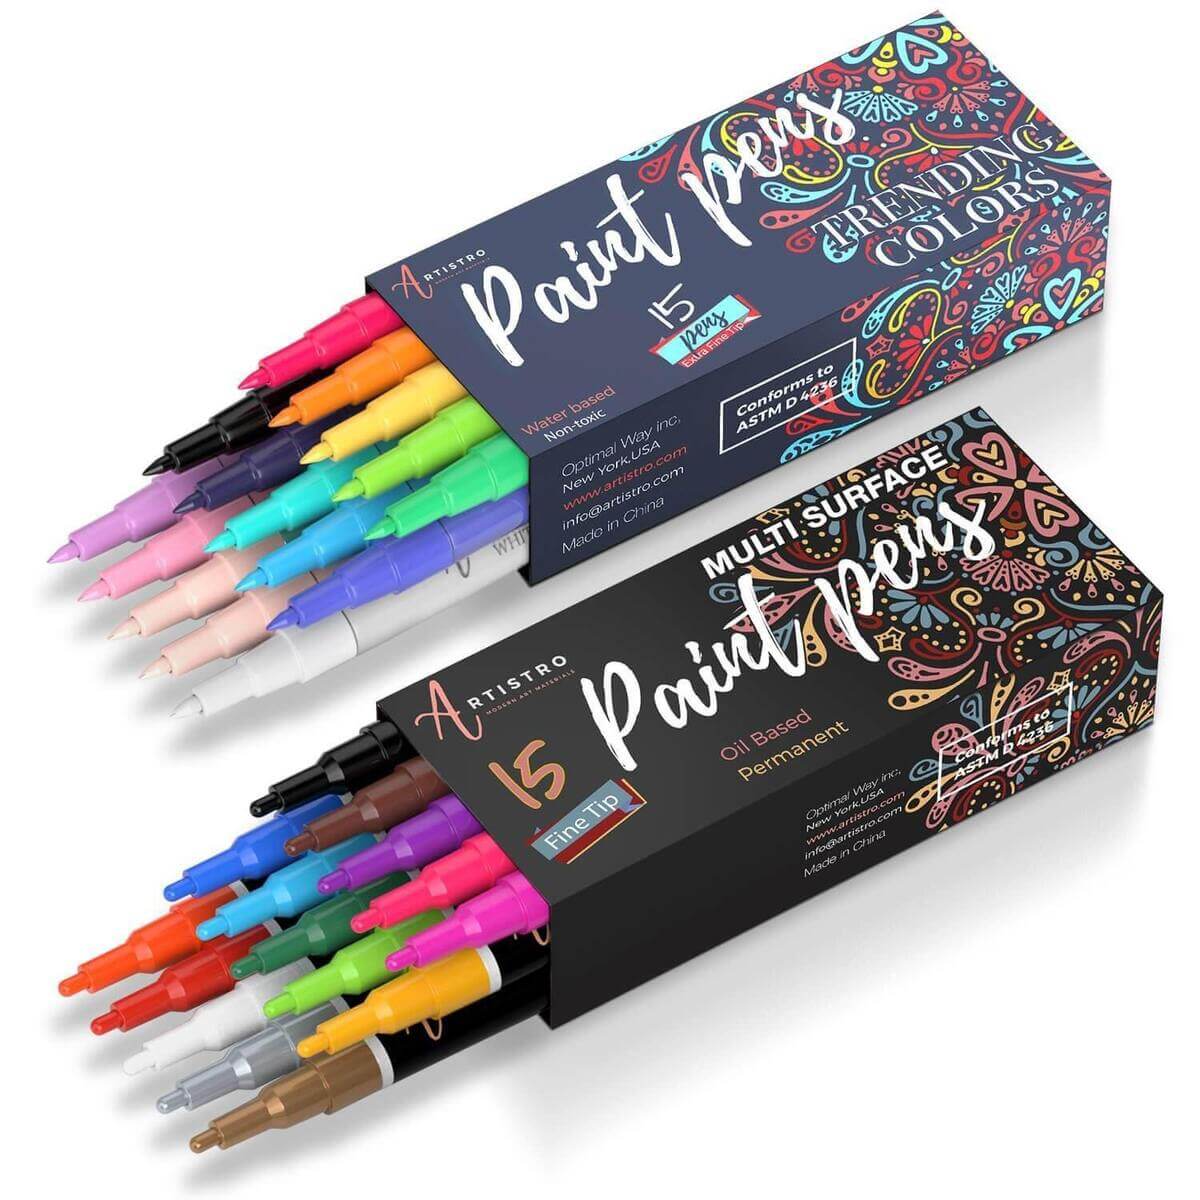 Artistro Acrylic Paint Pens For Fabric, Glass, Fine Tip, 30 colored paint  markers